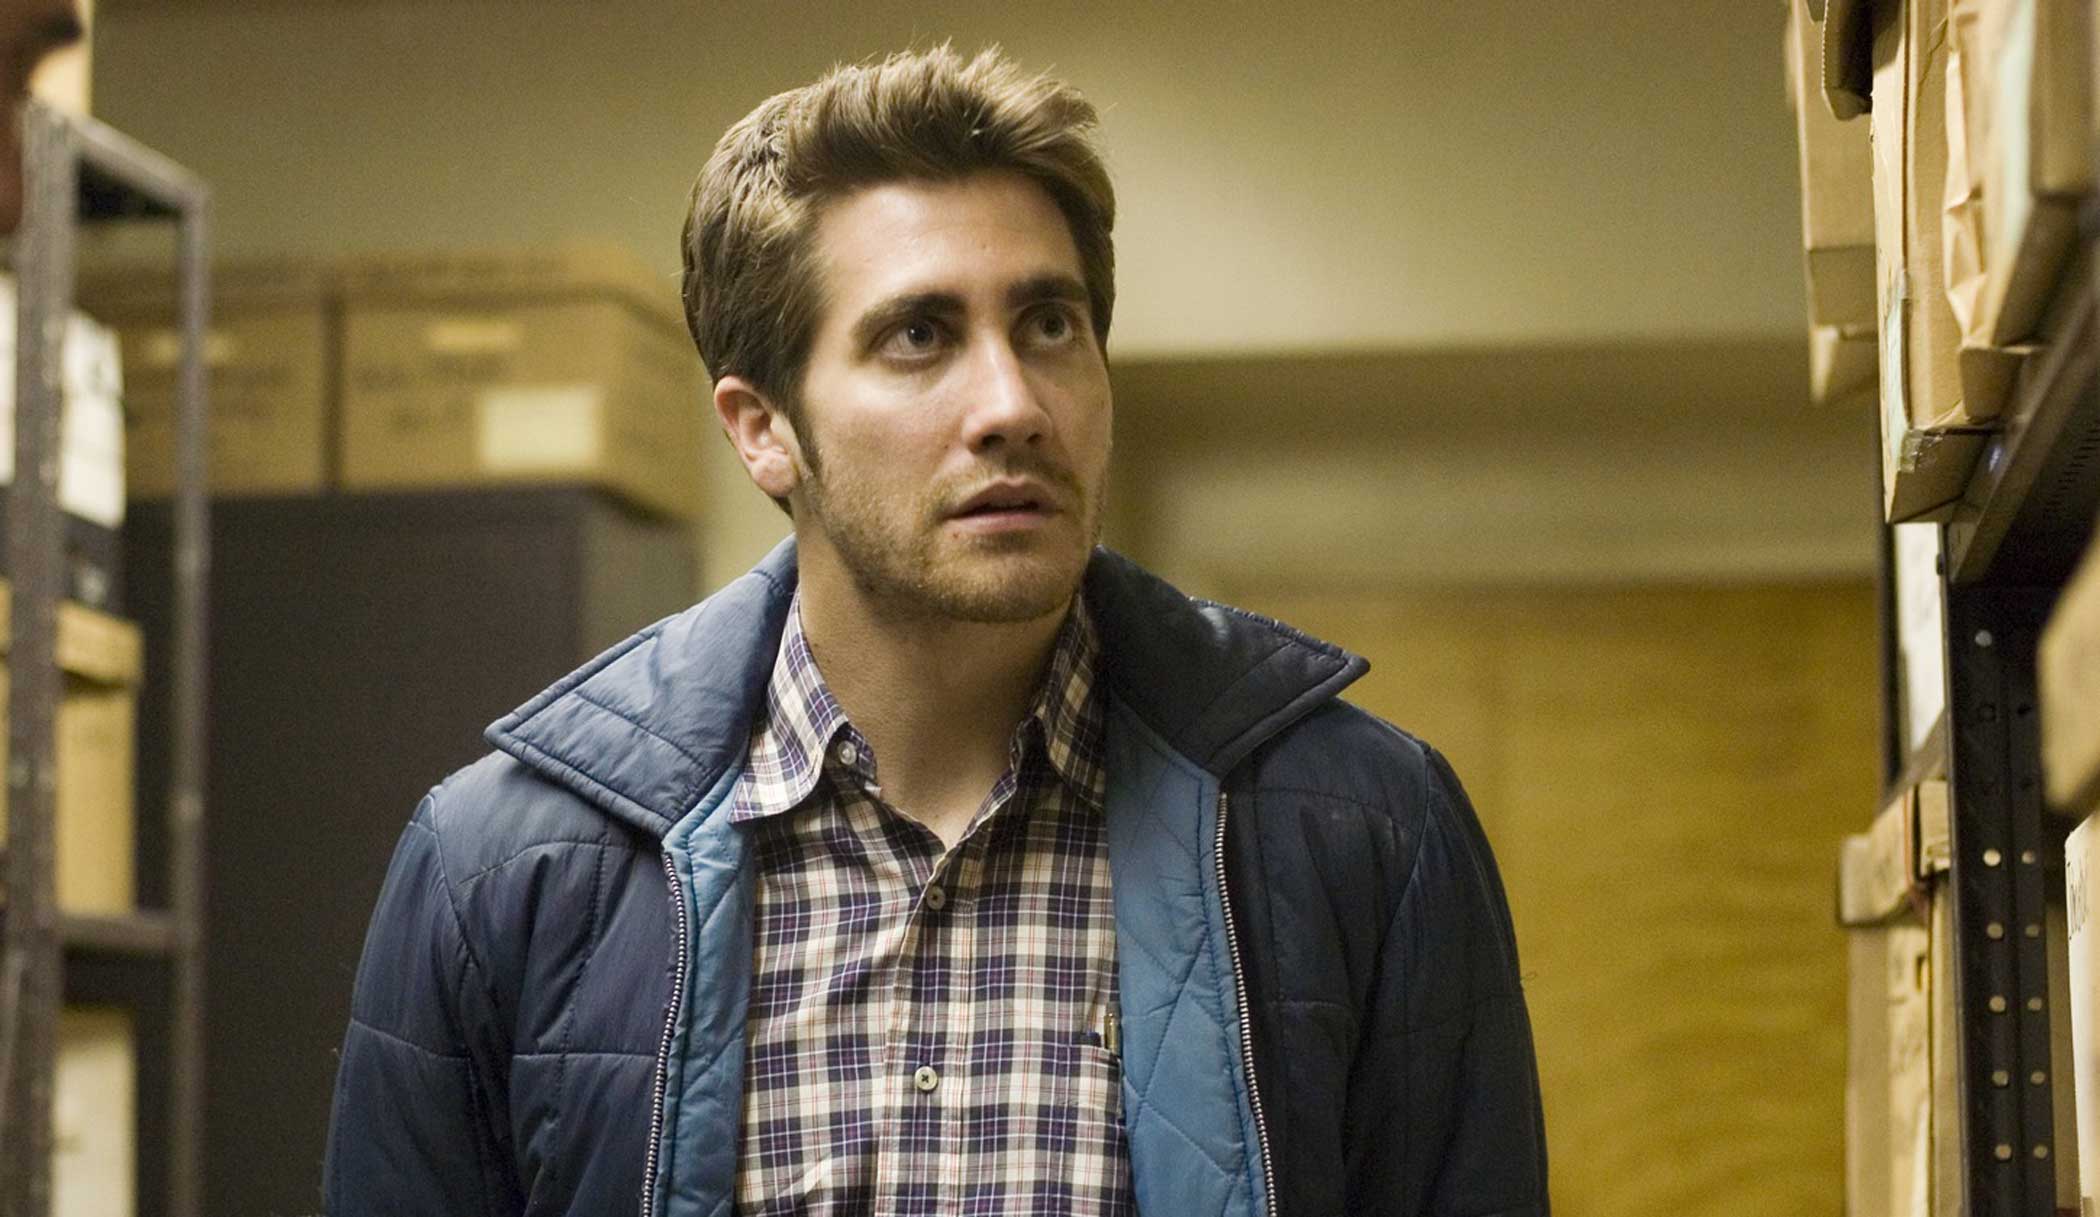 Zodiac, 2007
                              The David Fincher-directed film starring Jake Gyllenhaal is based on the real life events of the Zodiac Killer of the late 1960s, who terrorized San Francisco. At least four men and three women were confirmed dead, with the killer getting his nickname from a symbol he'd include in cryptic letters to newspaper outlets. The case was never solved and remains open.